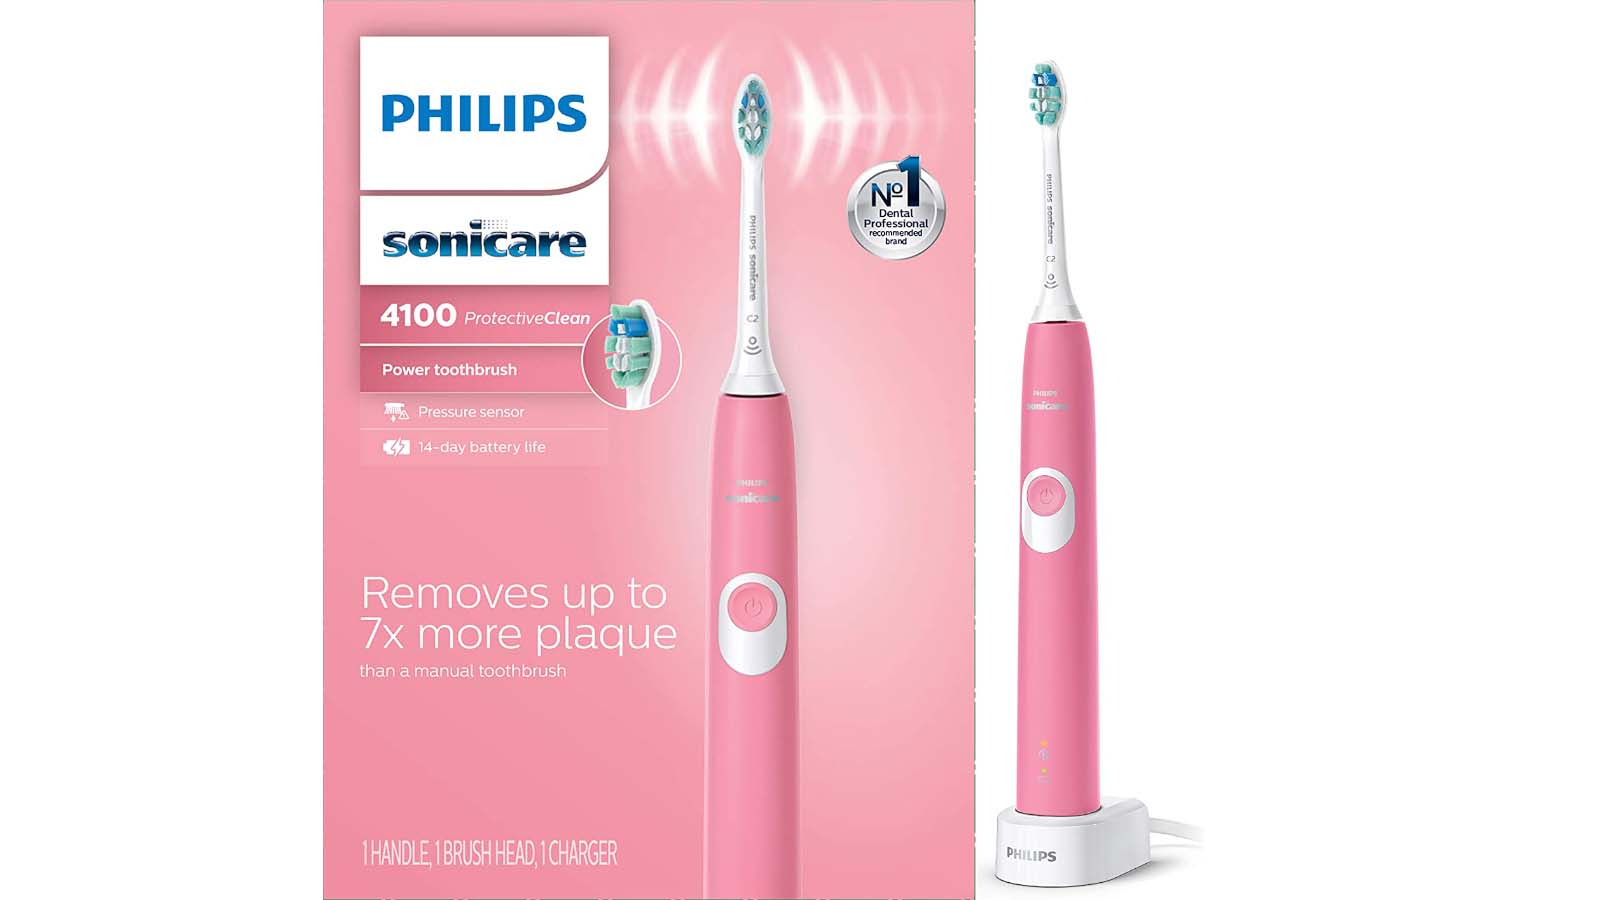 Philips Sonicare ProtectiveClean 4100 (Deep Pink, HX6815/01) toothbrush and its packaging